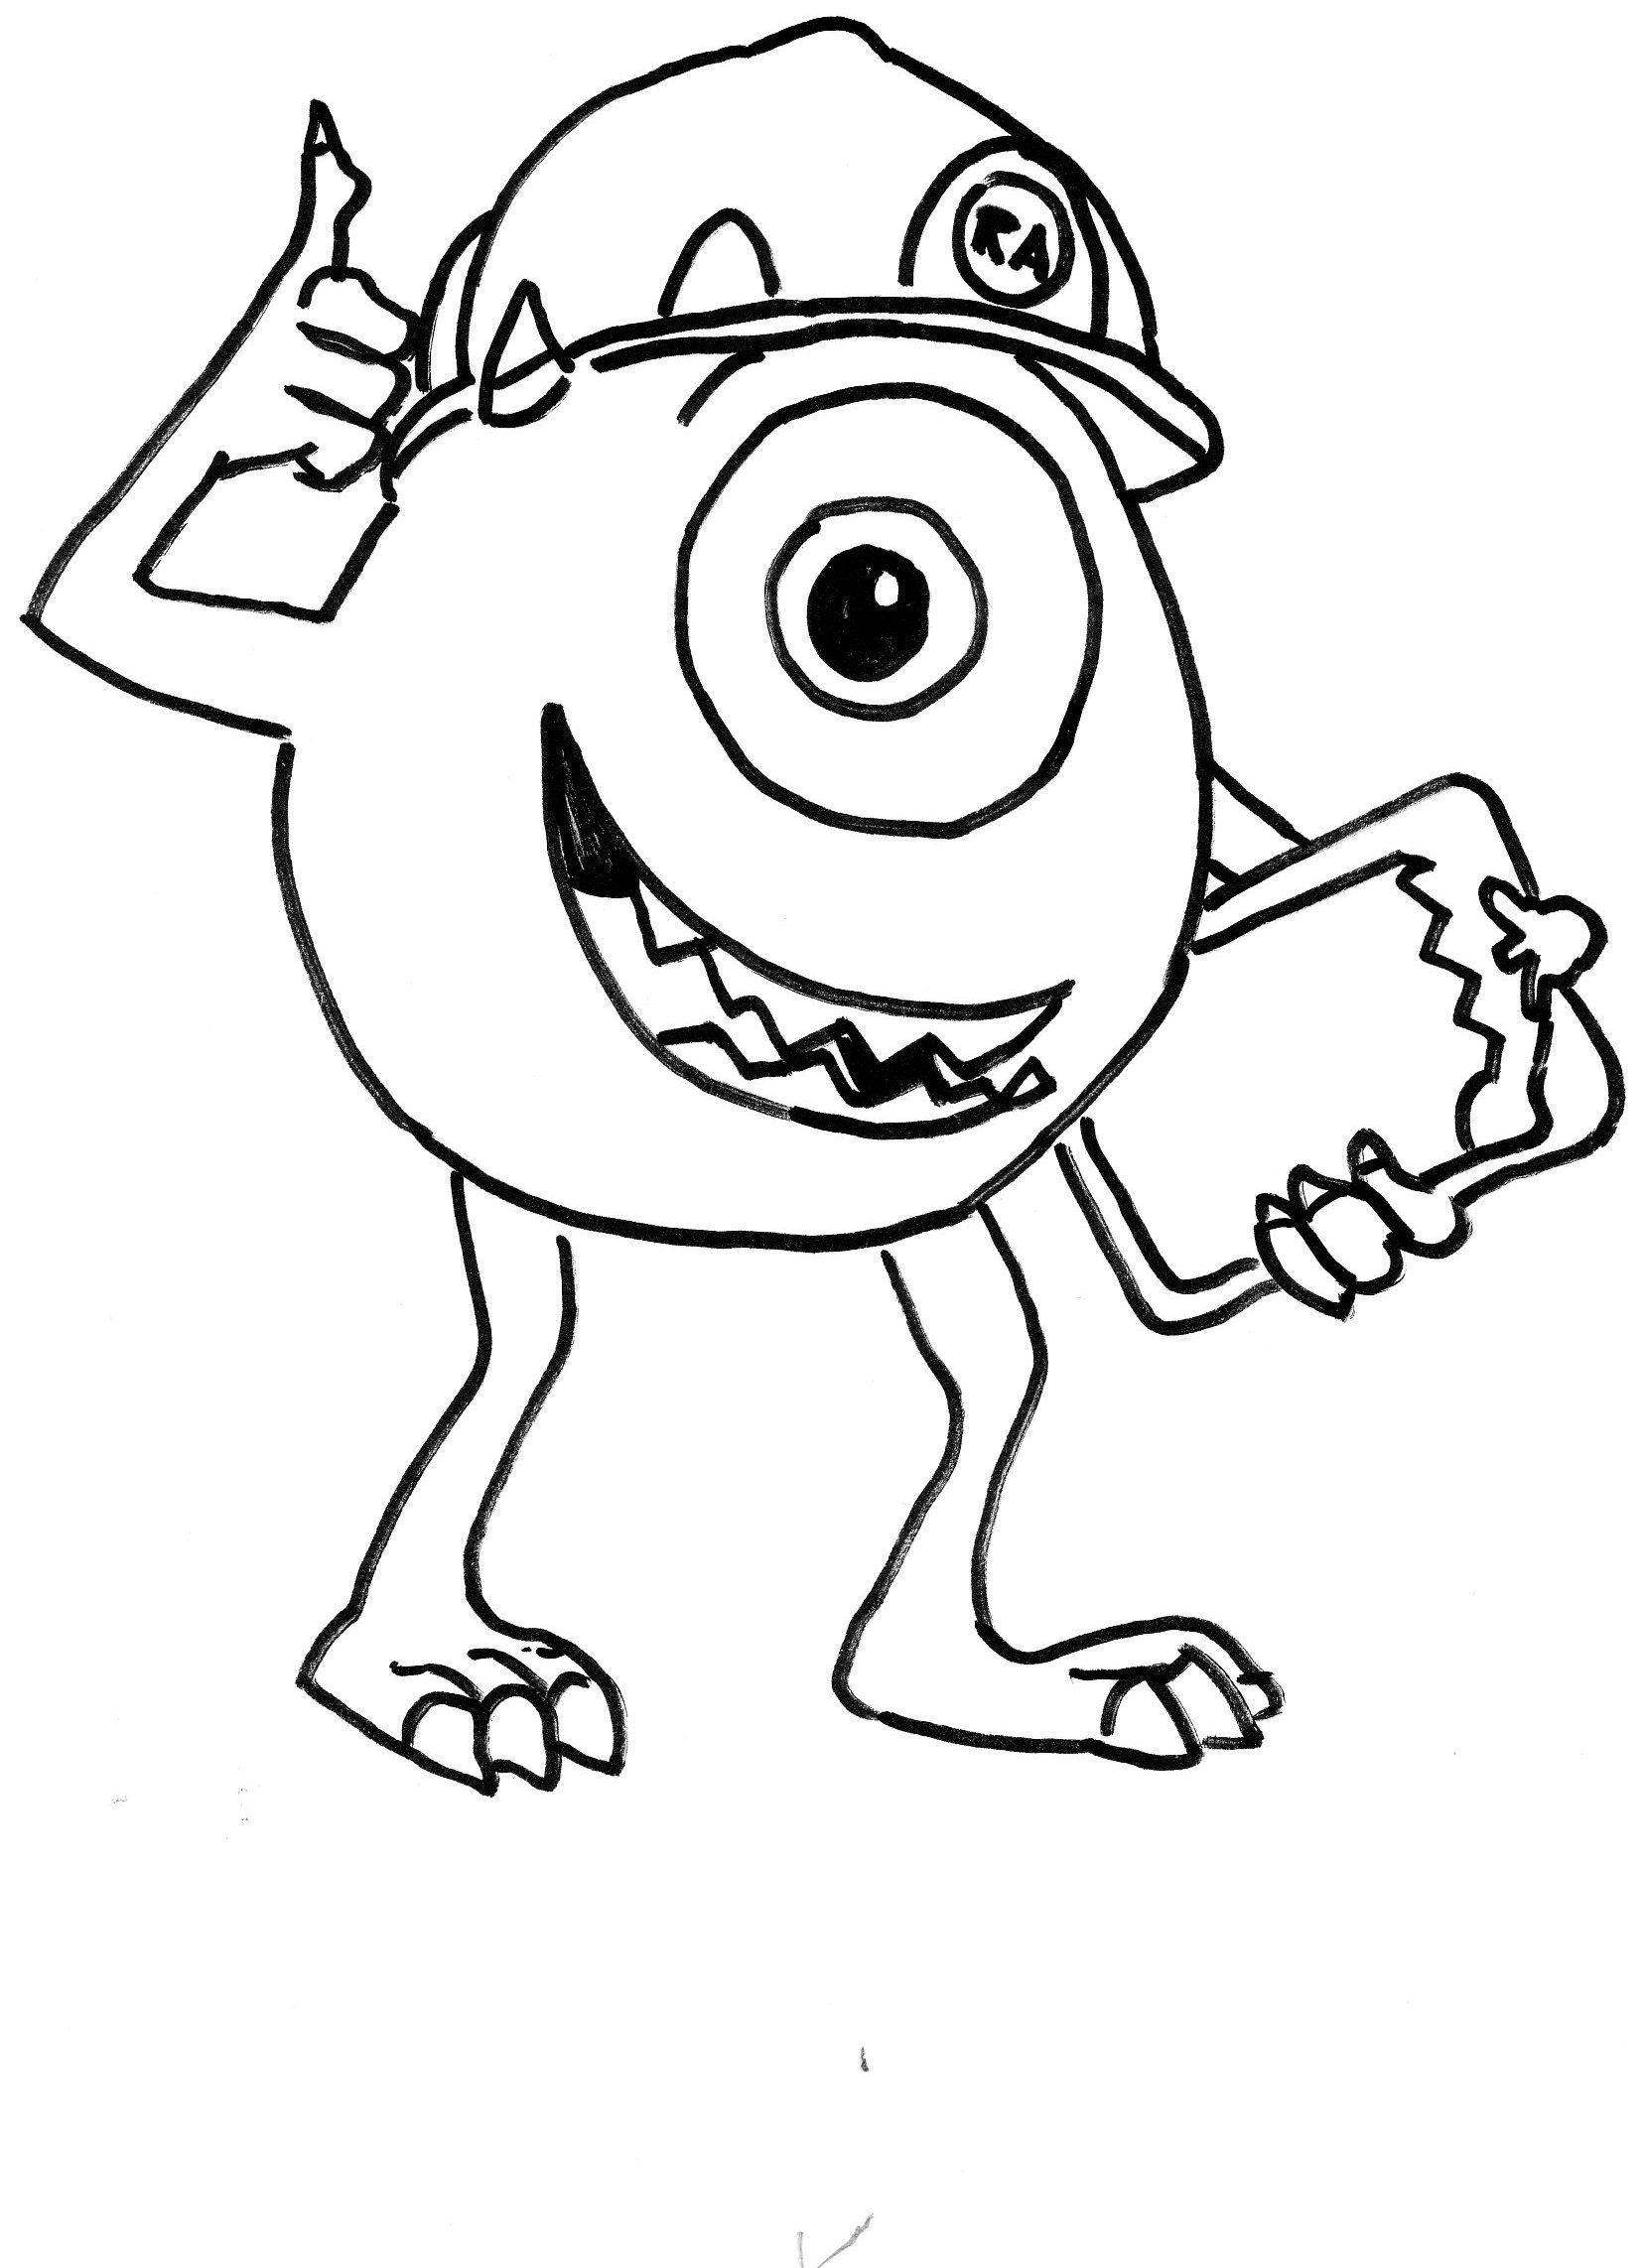 Boy Coloring Pages For Teachers - Coloring Pages For All Ages